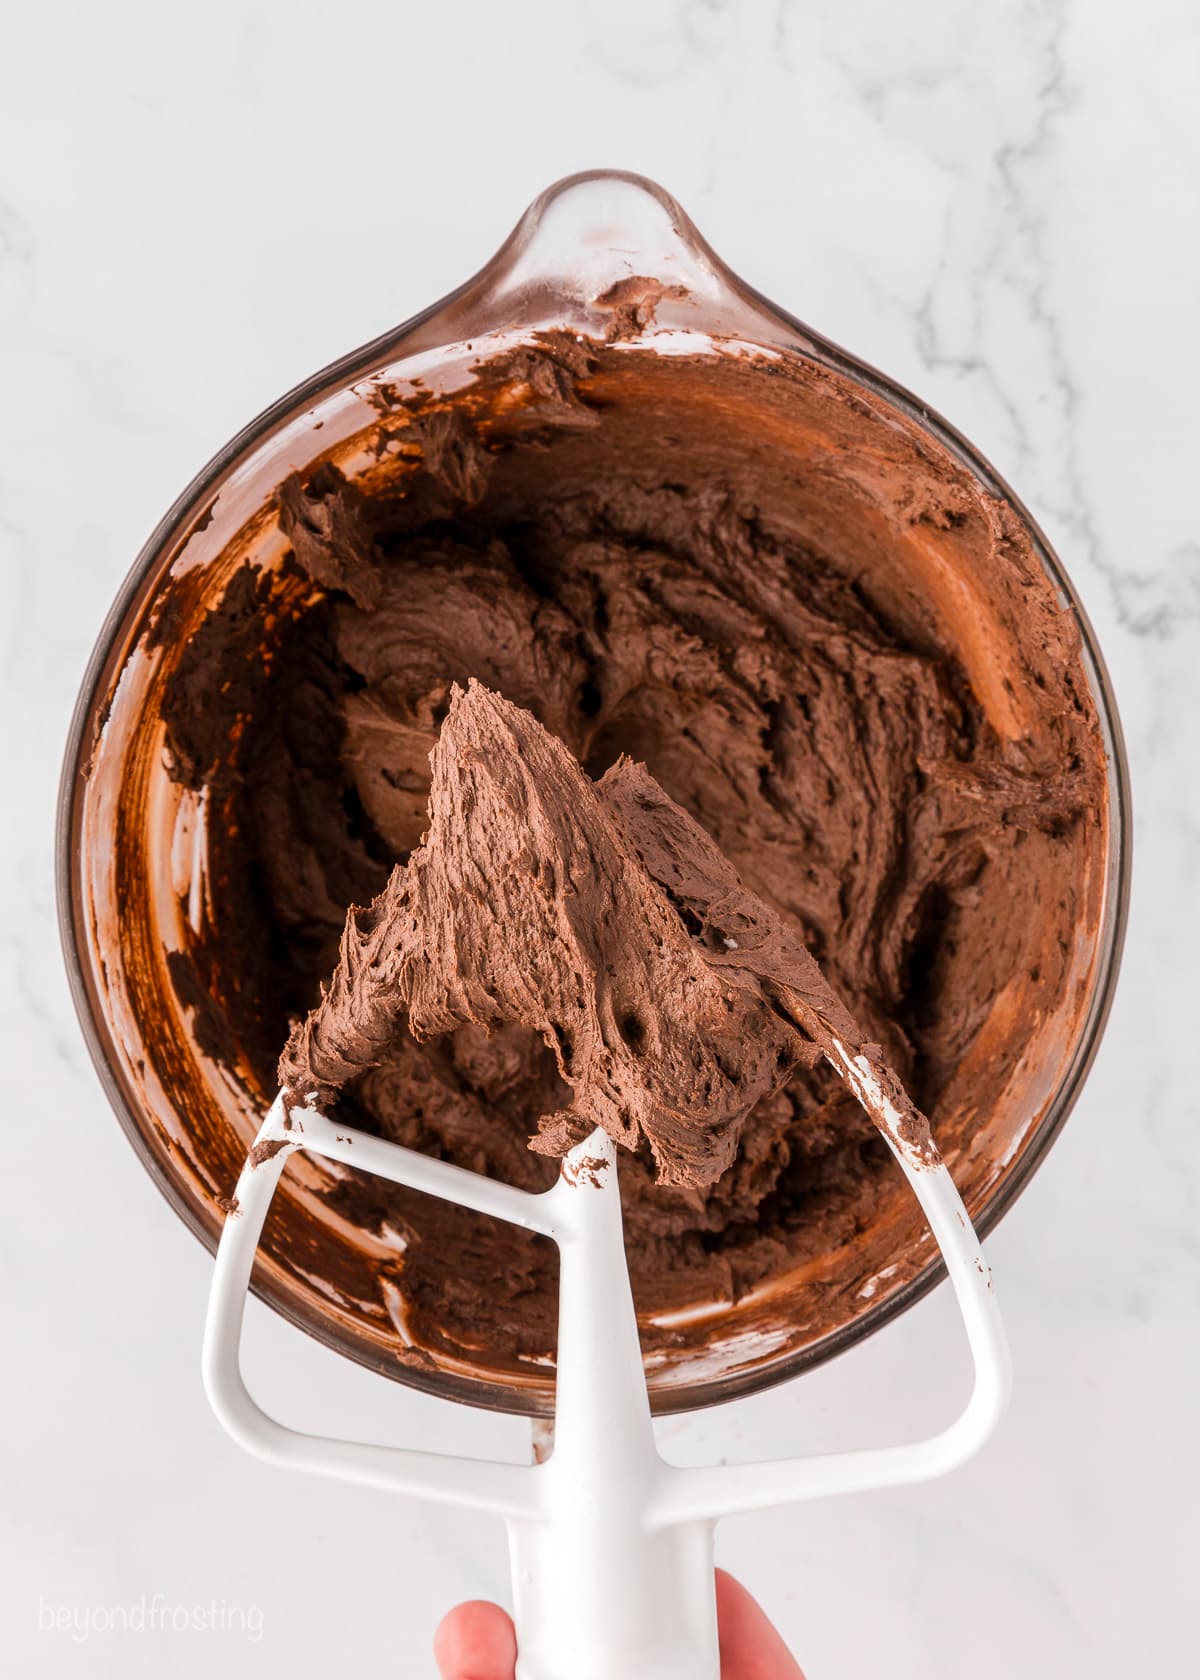 A hand holding a stand mixer attachment covered with chocolate buttercream over a mixing bowl filled with more frosting.